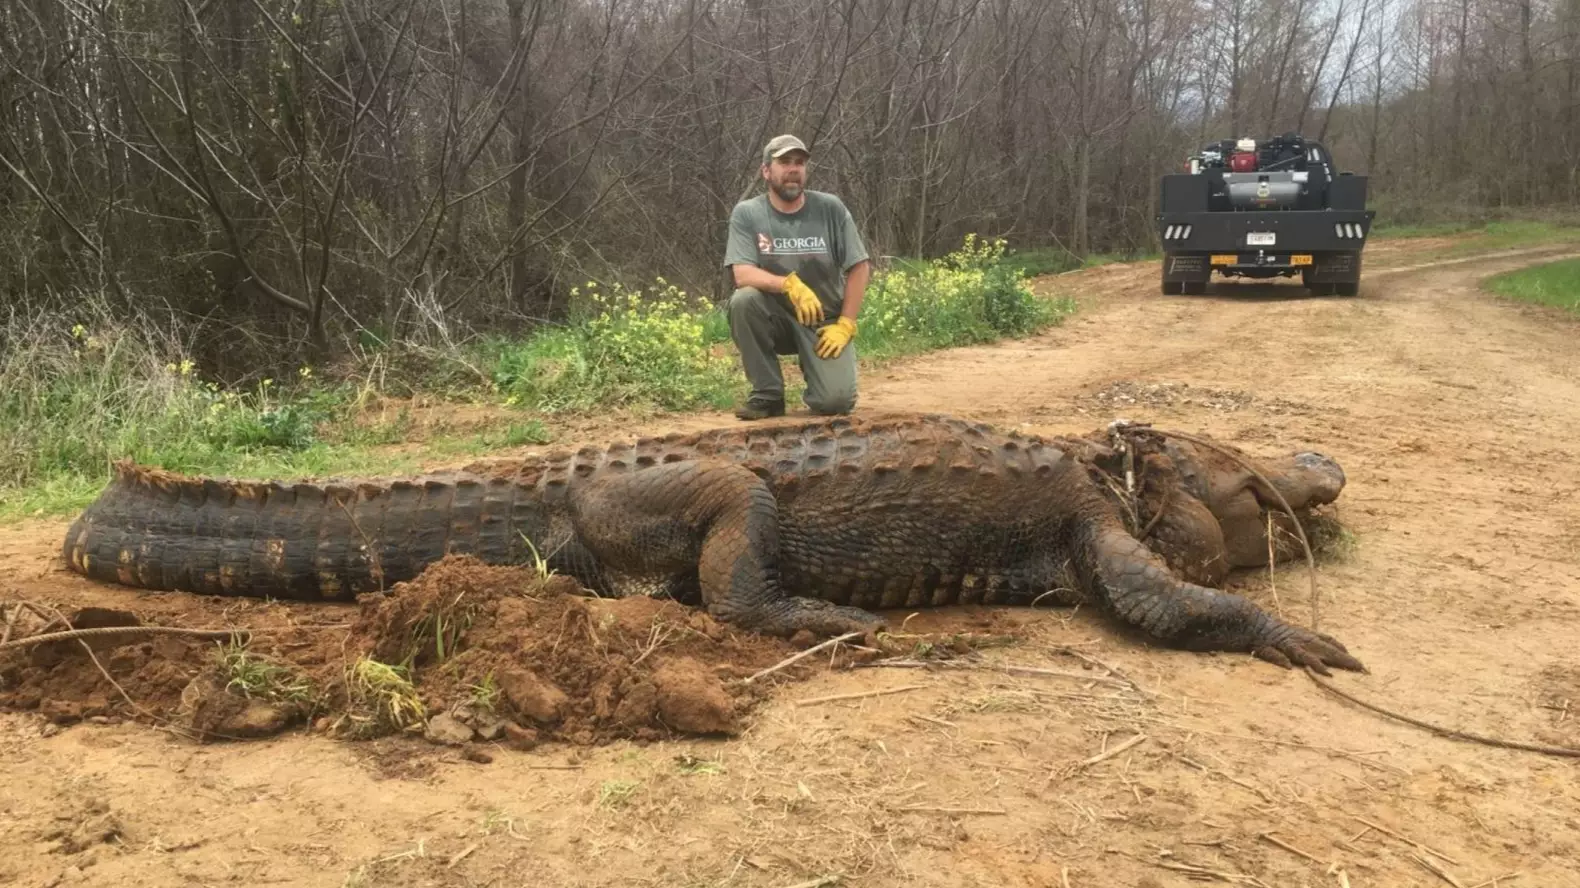 Giant Alligator Measuring 13ft Found In Ditch In US 